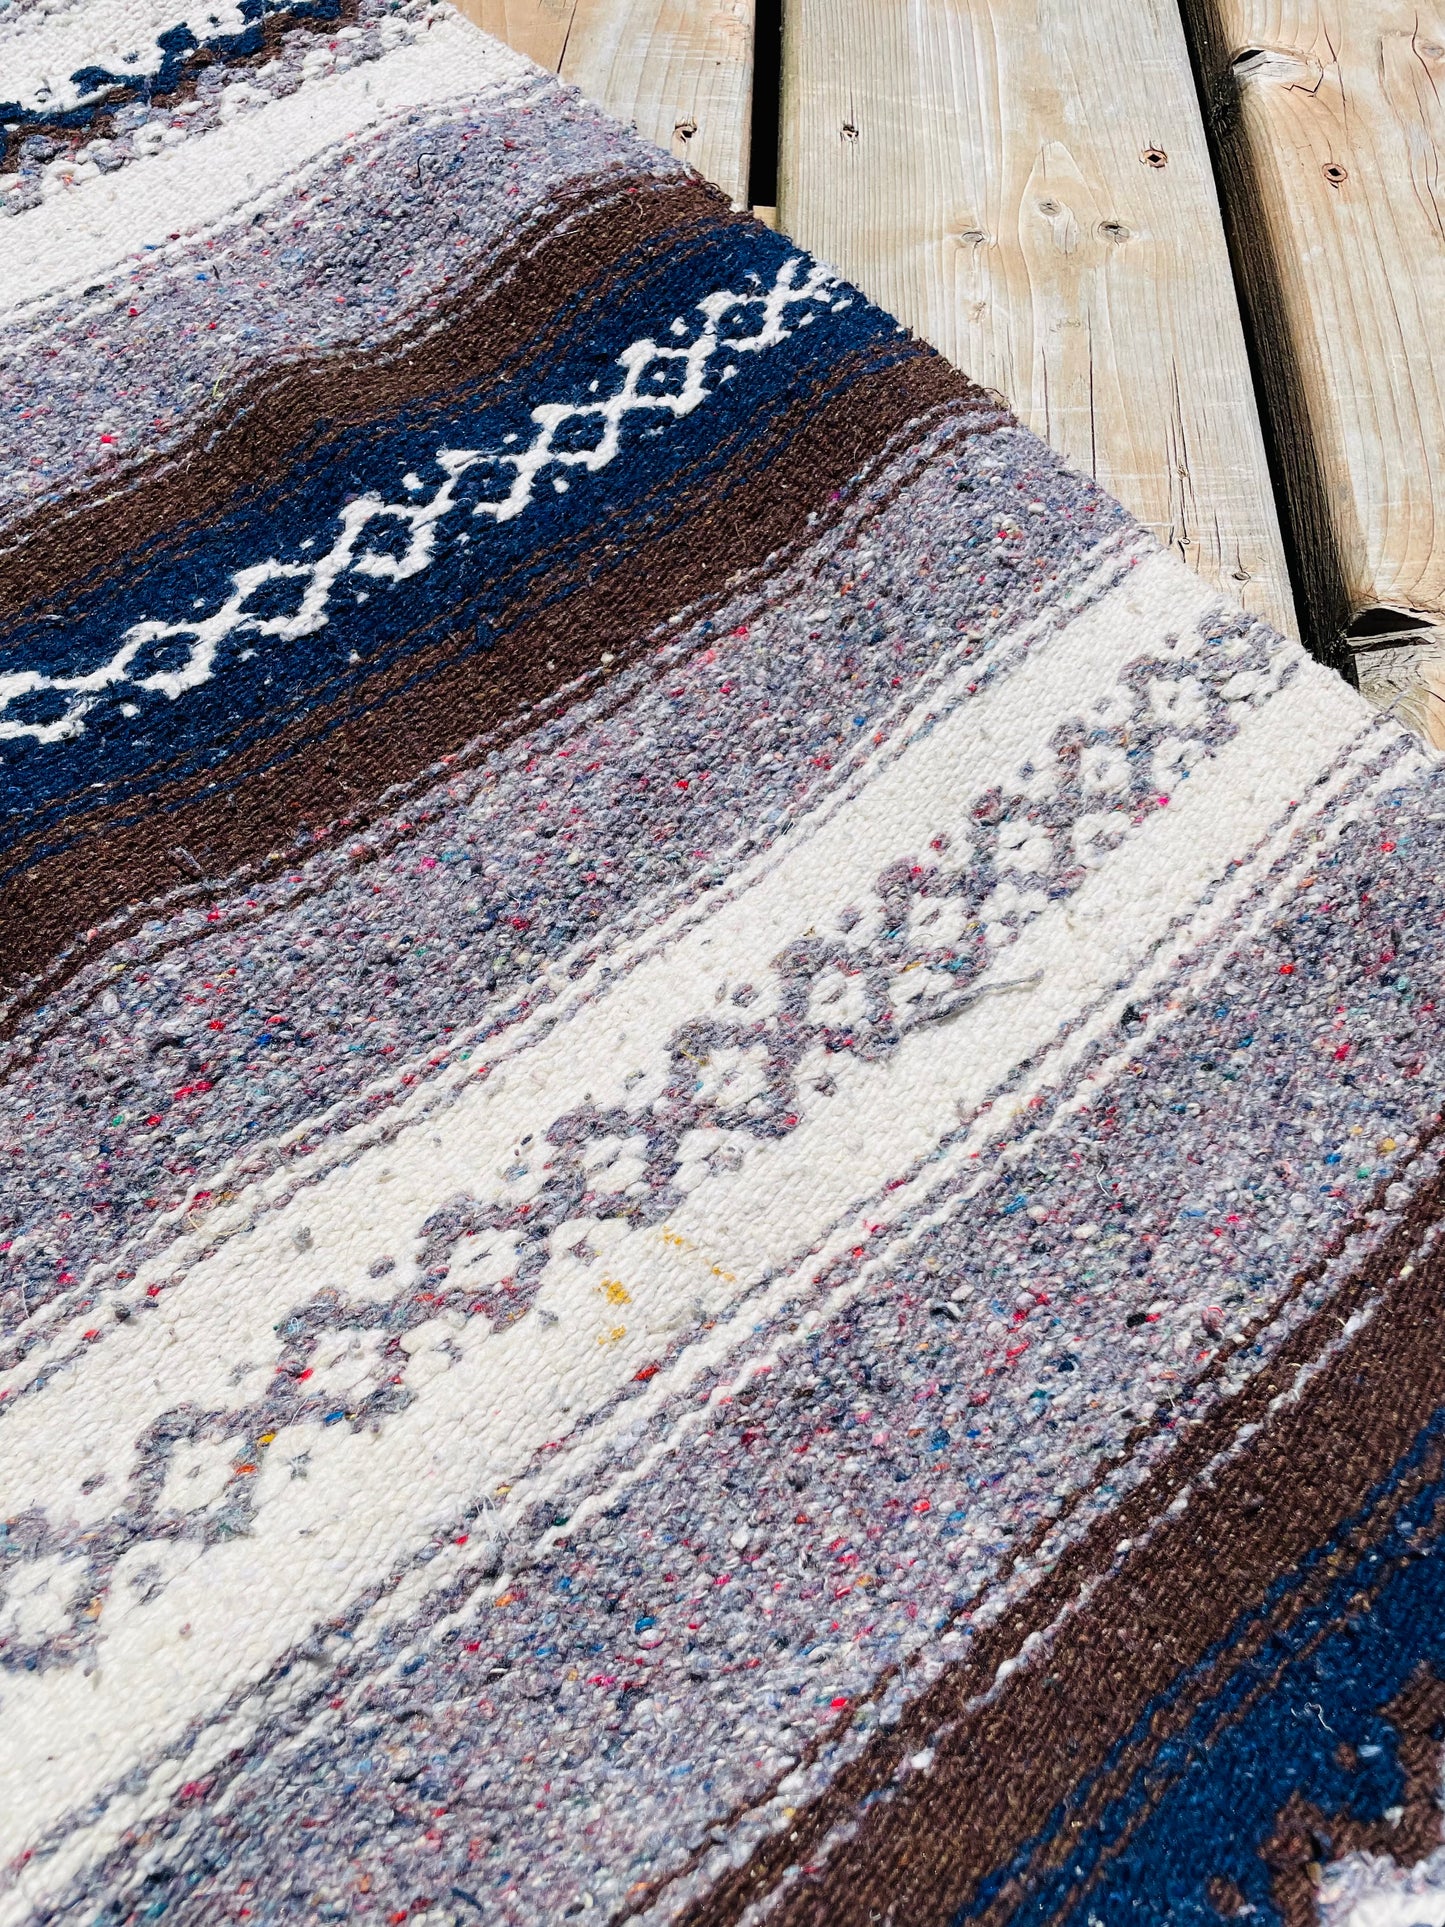 Large Mexican Blanket with Fringe